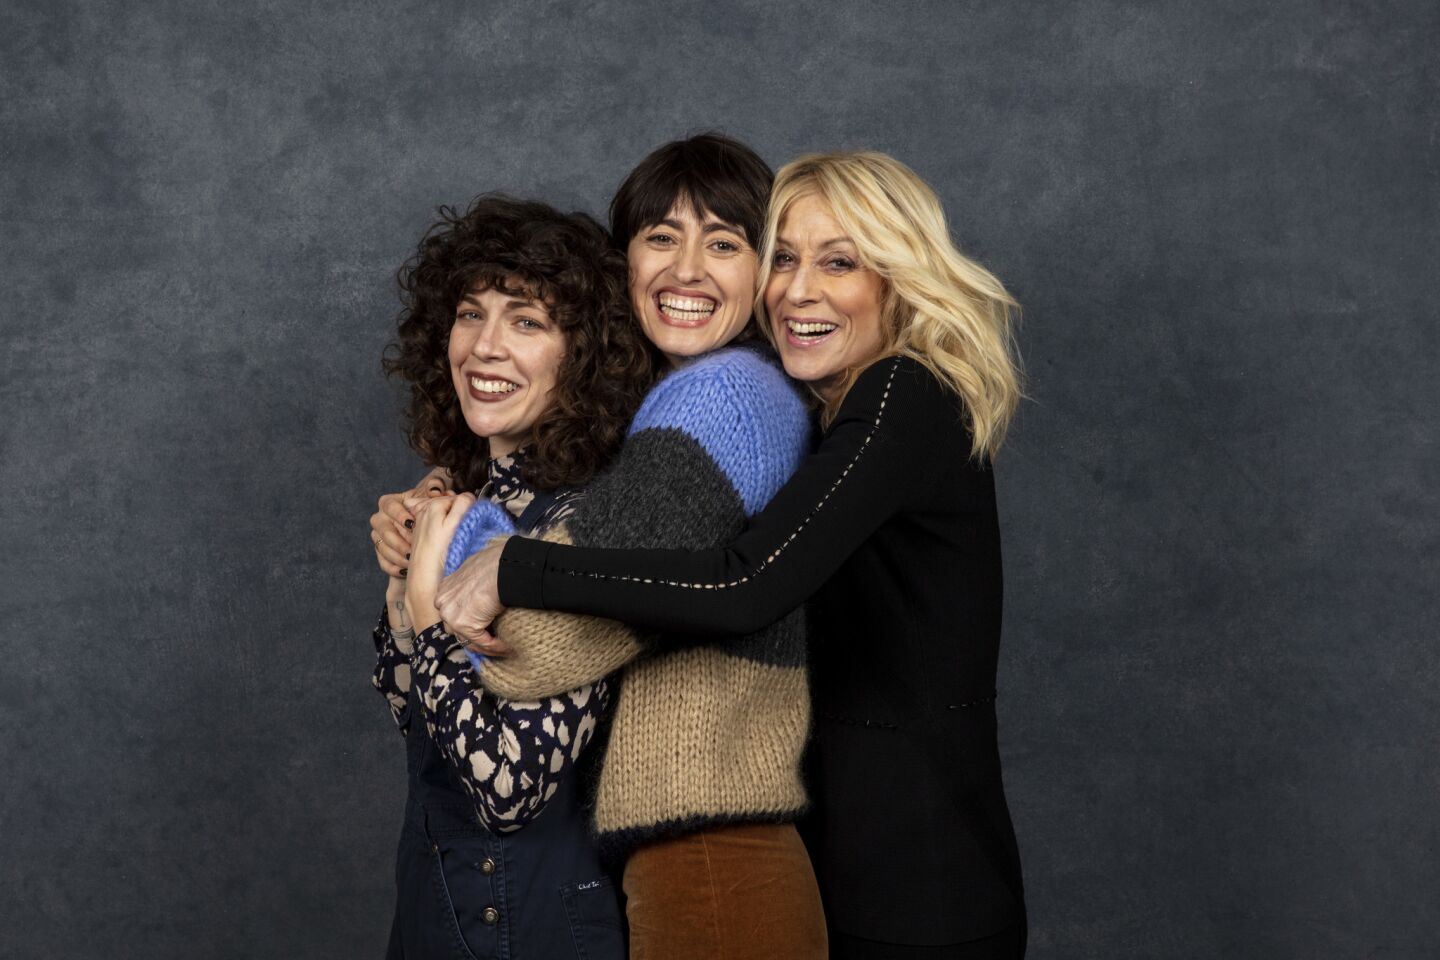 Actor Jenn Tullock, director/actor Hannah Pearl Utt, and actor Judith Light from the film "Before You Know It."